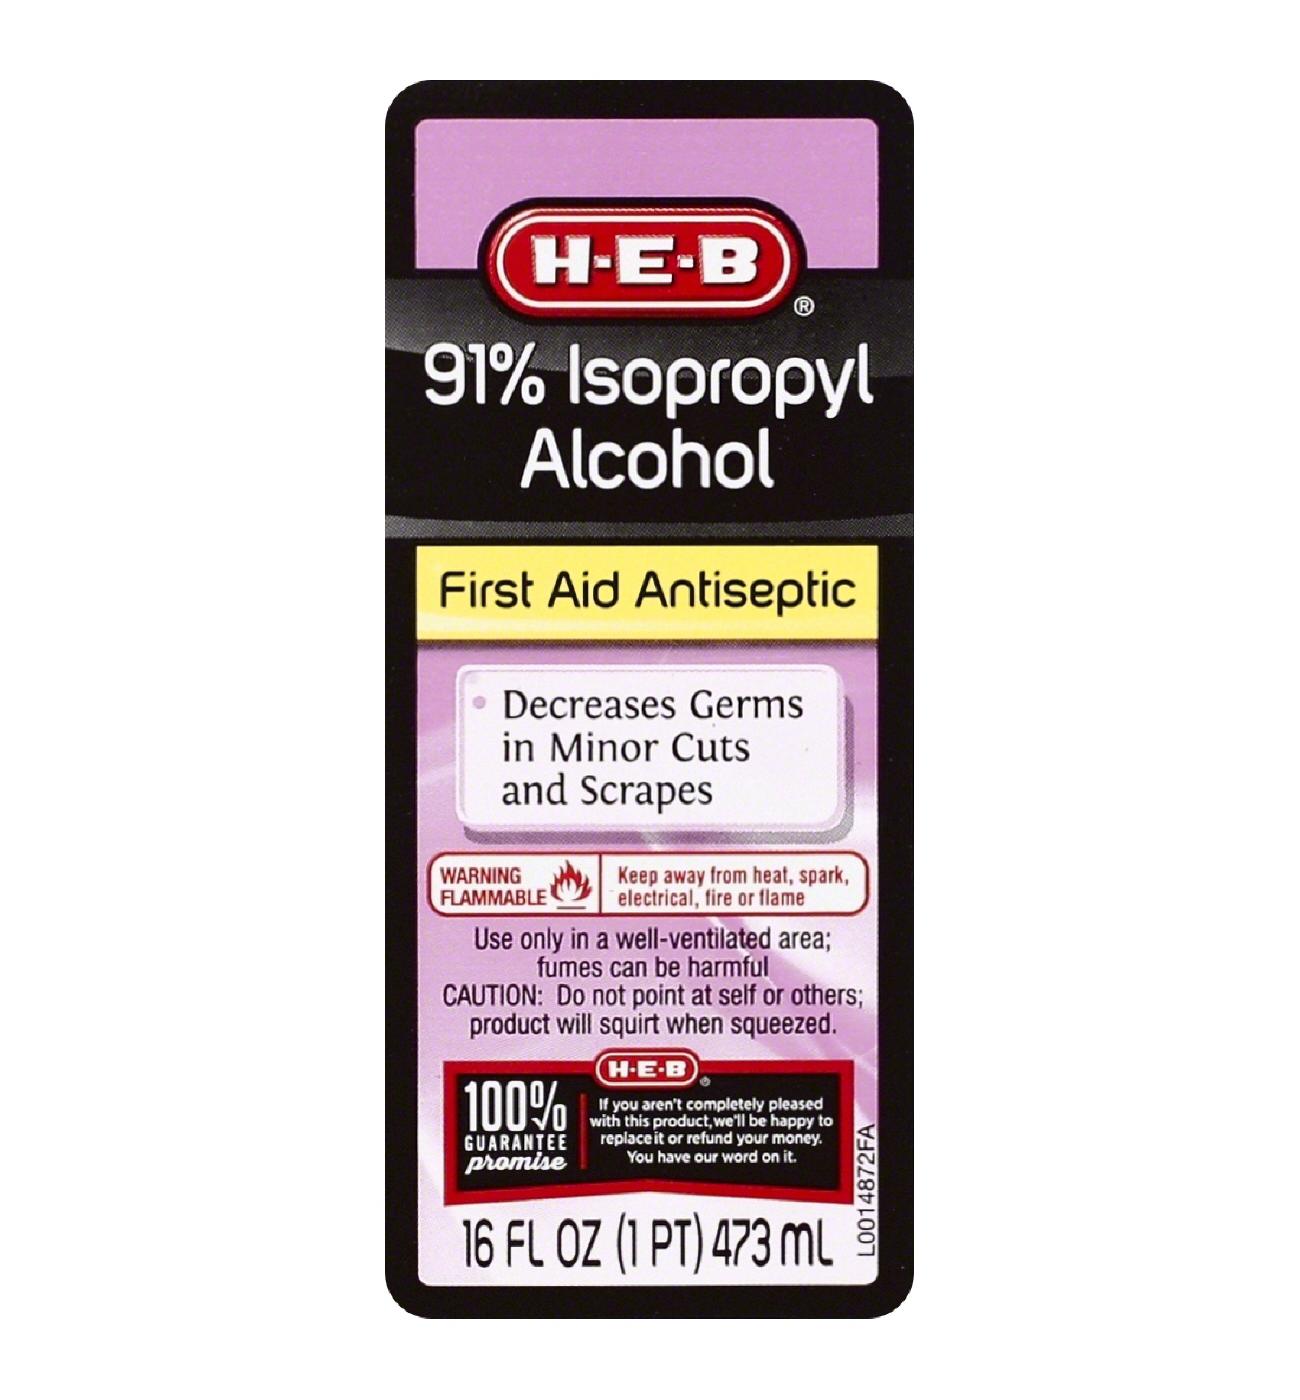 H-E-B Isopropyl Alcohol First Aid Antiseptic – 91%; image 2 of 2